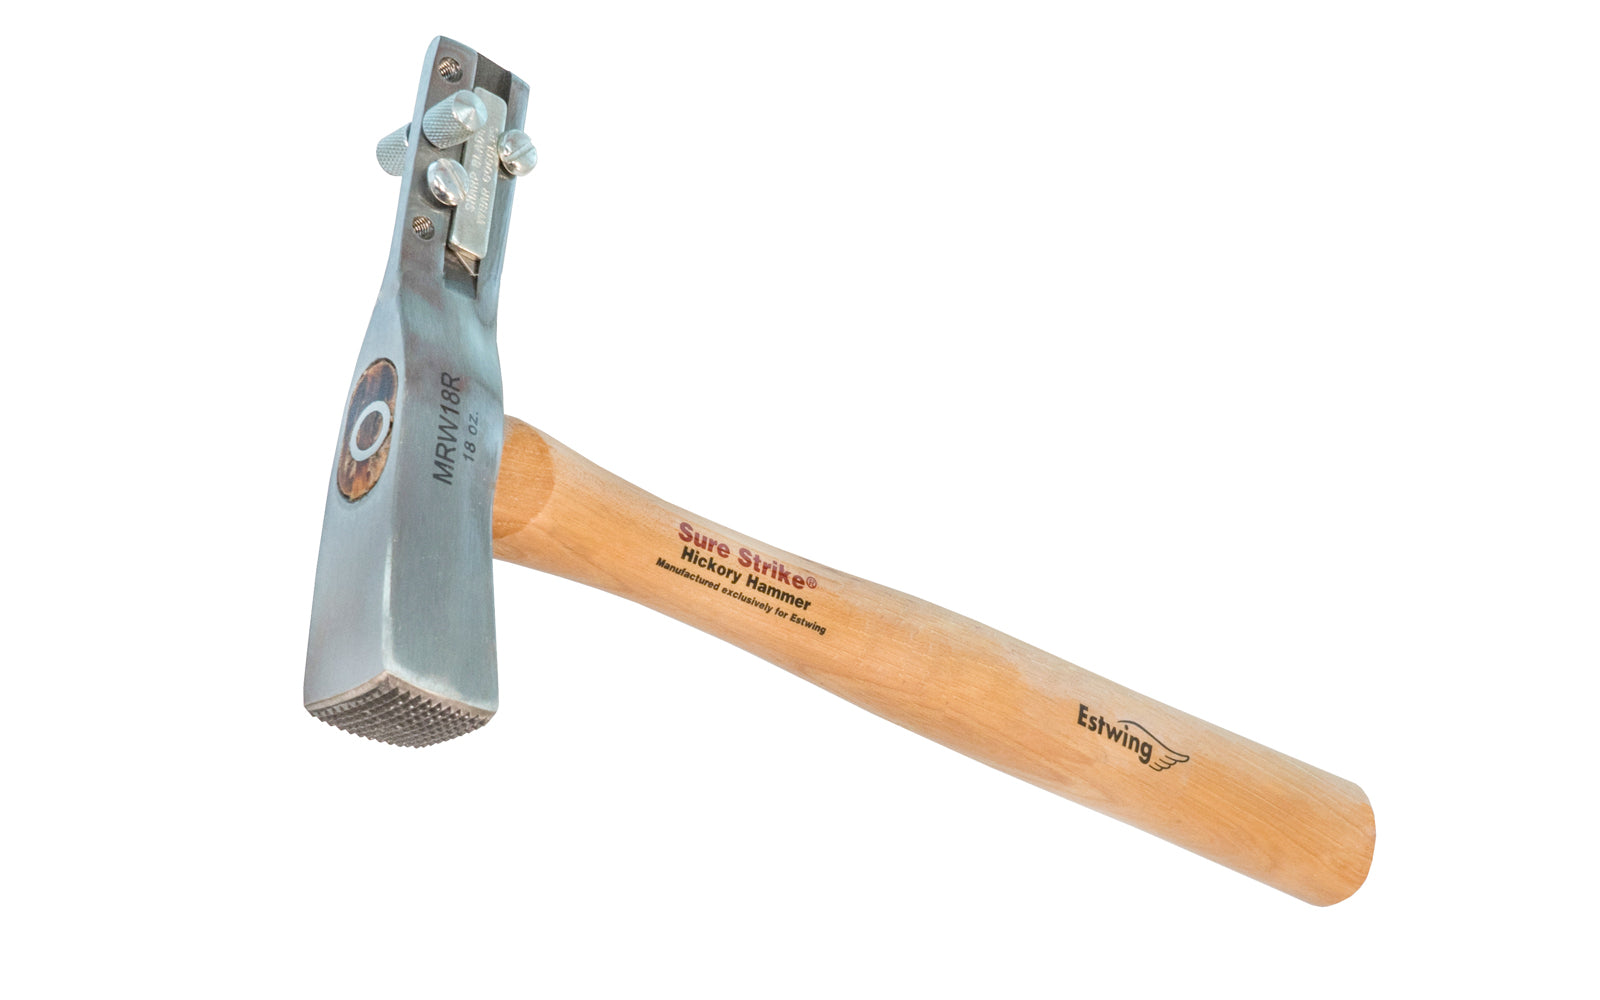 This 18 oz Estwing "Sure Strike" Shingle Hatchet is fully polished with a milled face, & back blade. Three-hole gauges on hatchet helps set overhang/exposure of shingles. Handle is 13" long & made of top quality hickory hardwood. Designed for wooden shingles or shakes. Model No. MRW18R. 034139924418